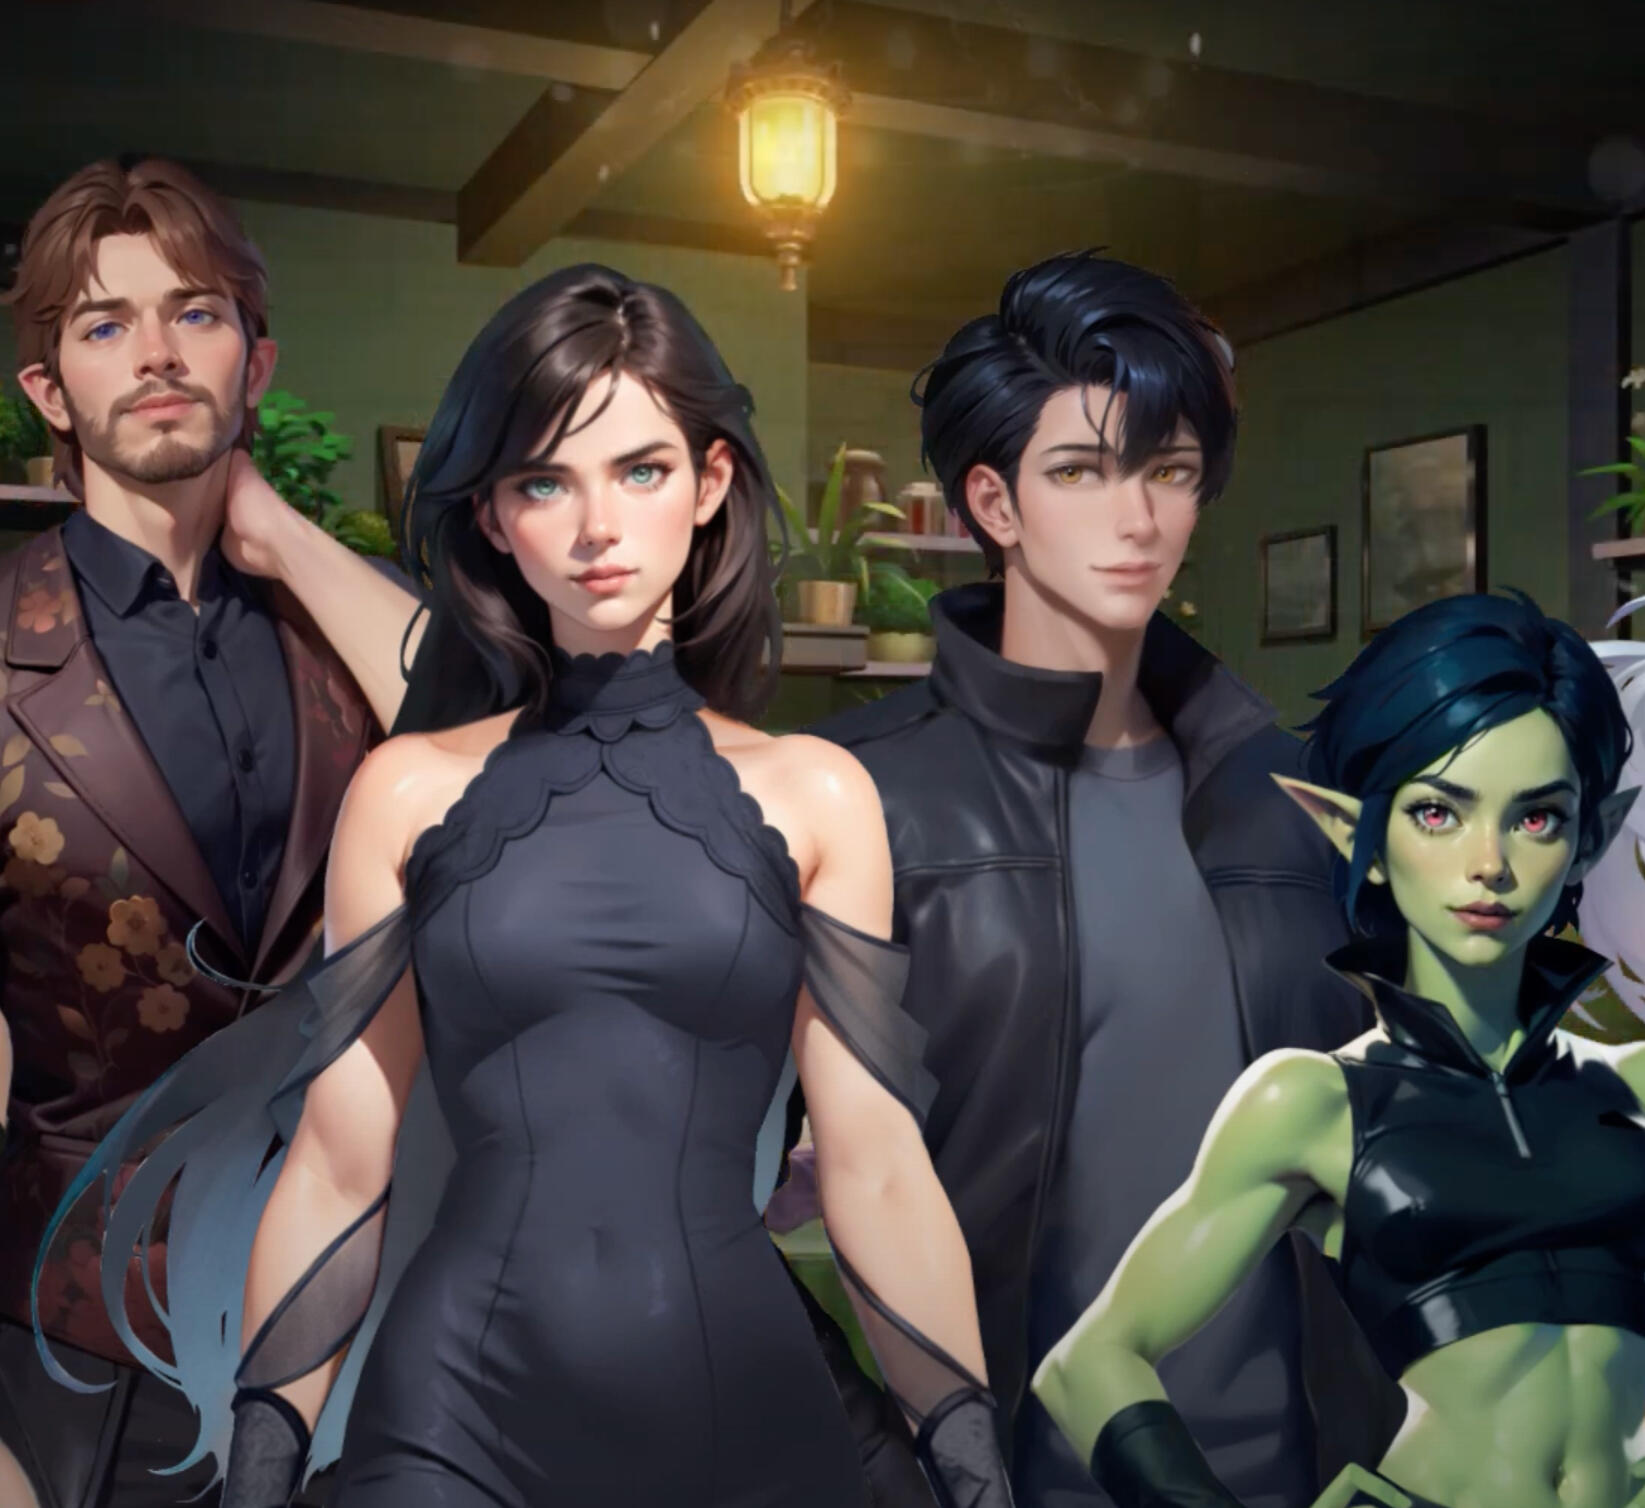 four astraelan characters in an olive green room filled with bookshelves and plants. from left to right: Faeran, an elven man with brown-red hair, violet eyes, and a brown floral corset suit; Thana, a woman with black hair, sea blue-green eyes, and a black